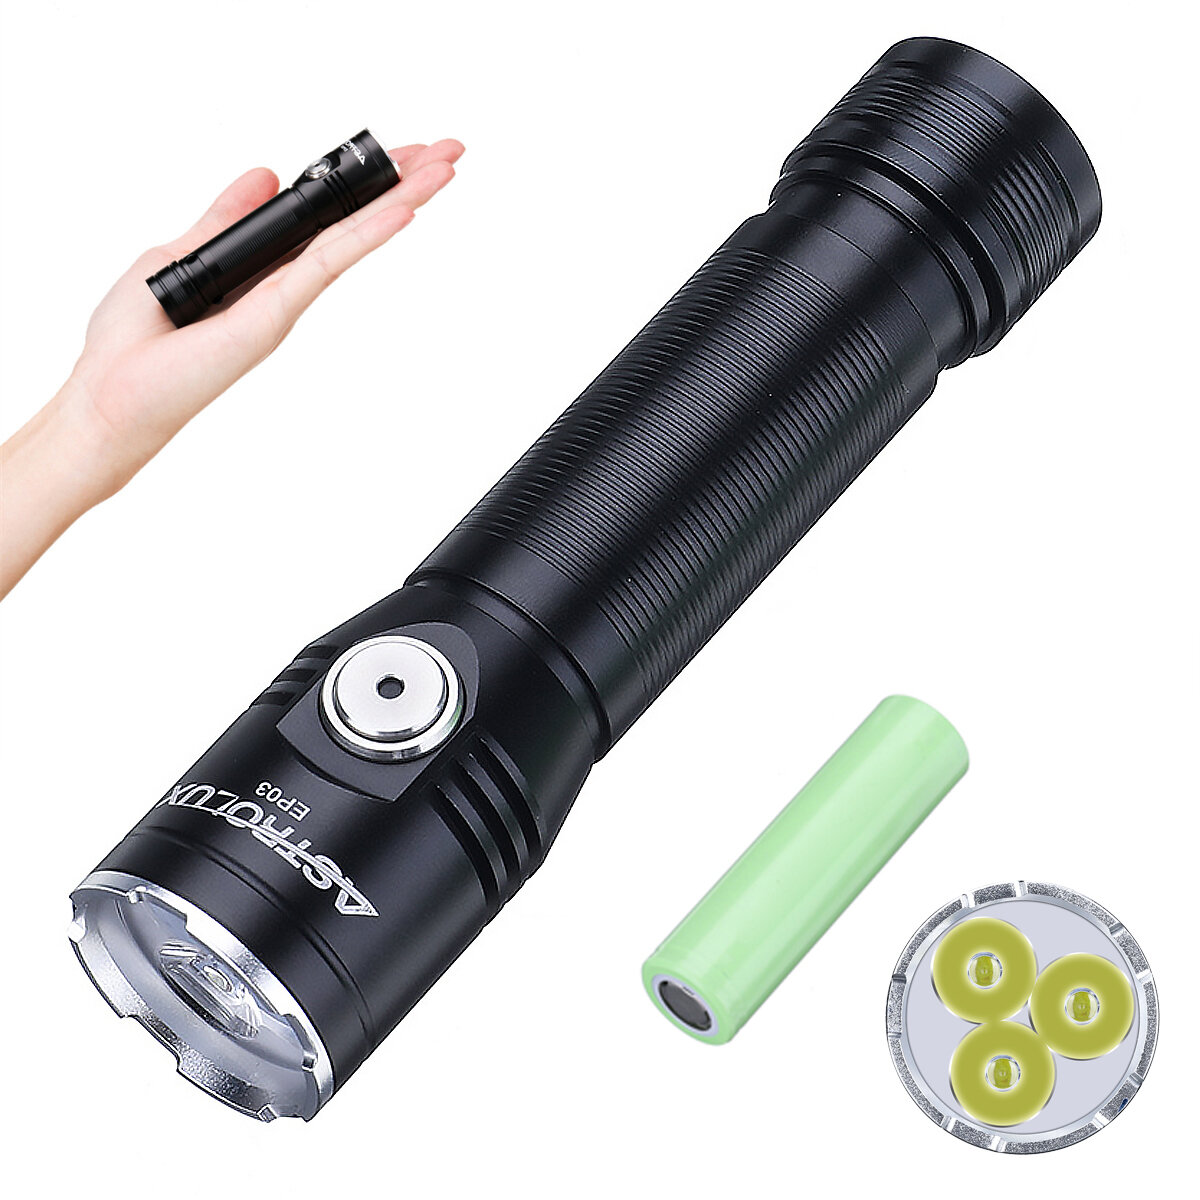 Astrolux® EP03 2050LM LH351B LED Super Bright Flashlight 8H Runtime Type-C Rechargeable with 18650 Battery IP67 Waterproof Torch Emergency Camping Lantern